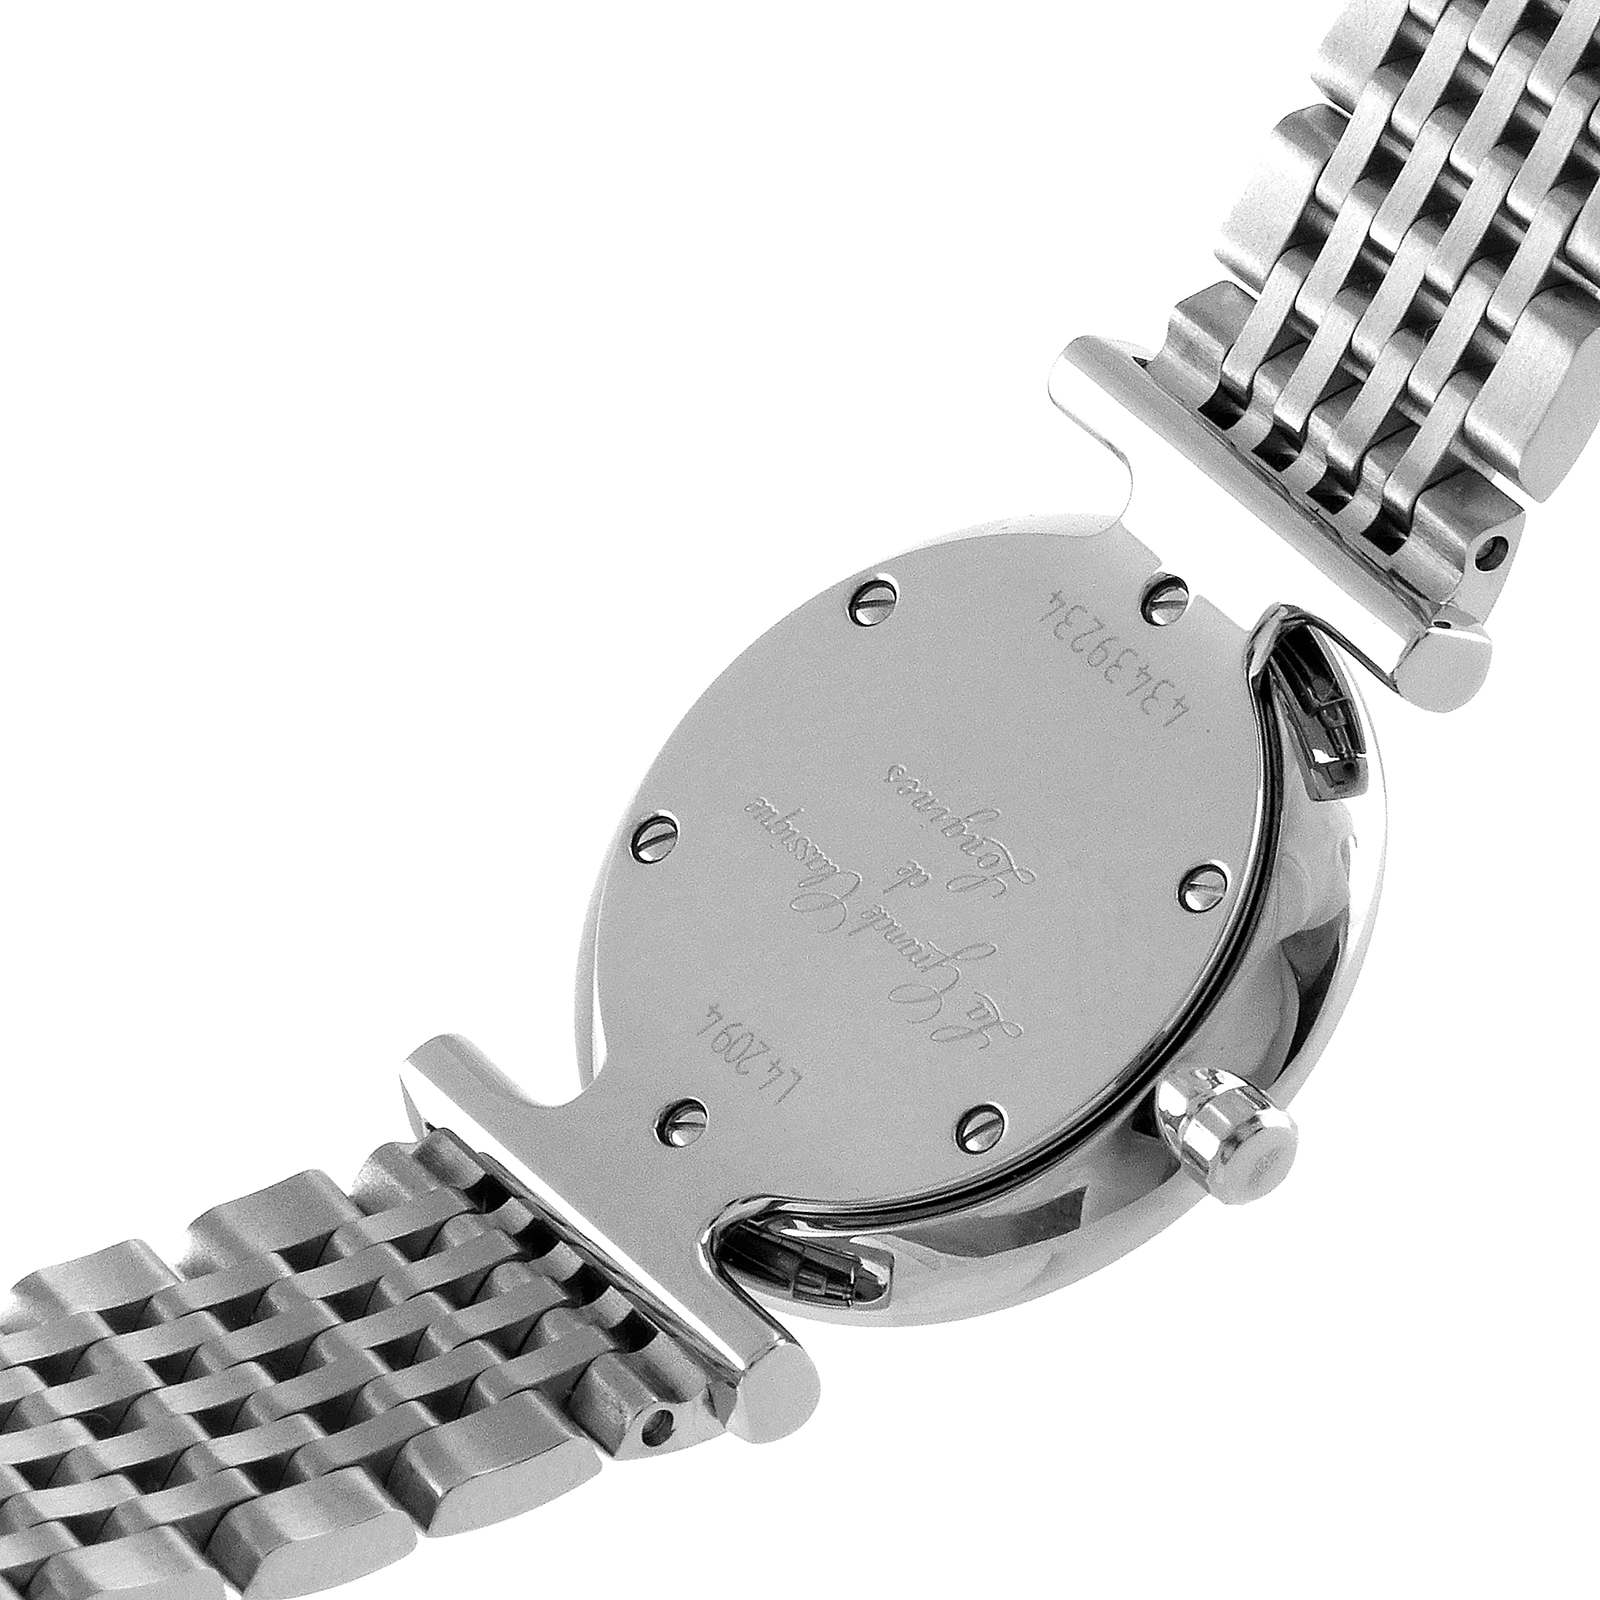 Bracelet Watch can be Personalized with Charms - gnoceoutlet.com